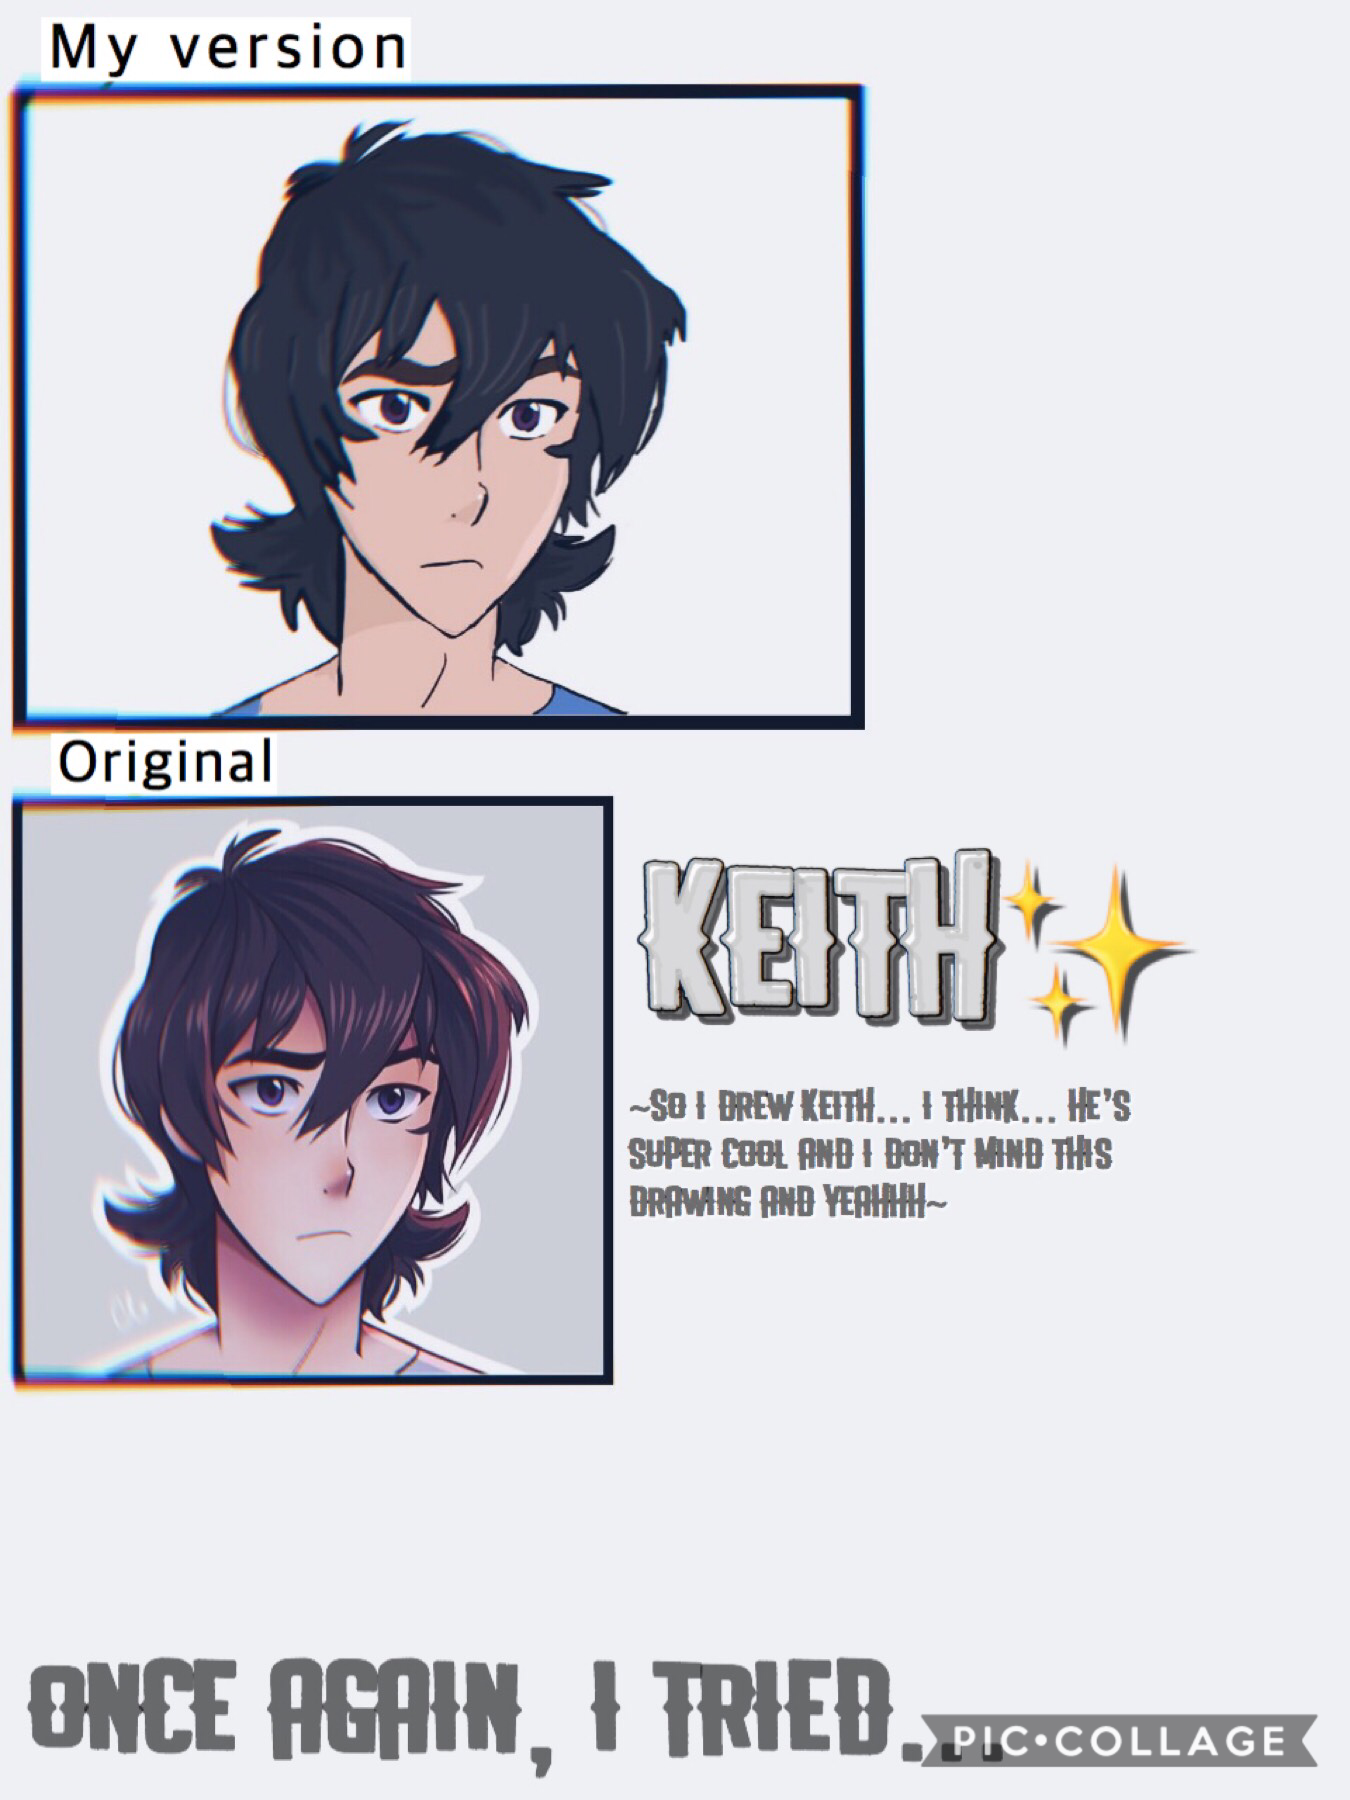 ✨ T A P ✨
So... yeah... Keith May be one of my favourites...but it is really hard to decide 